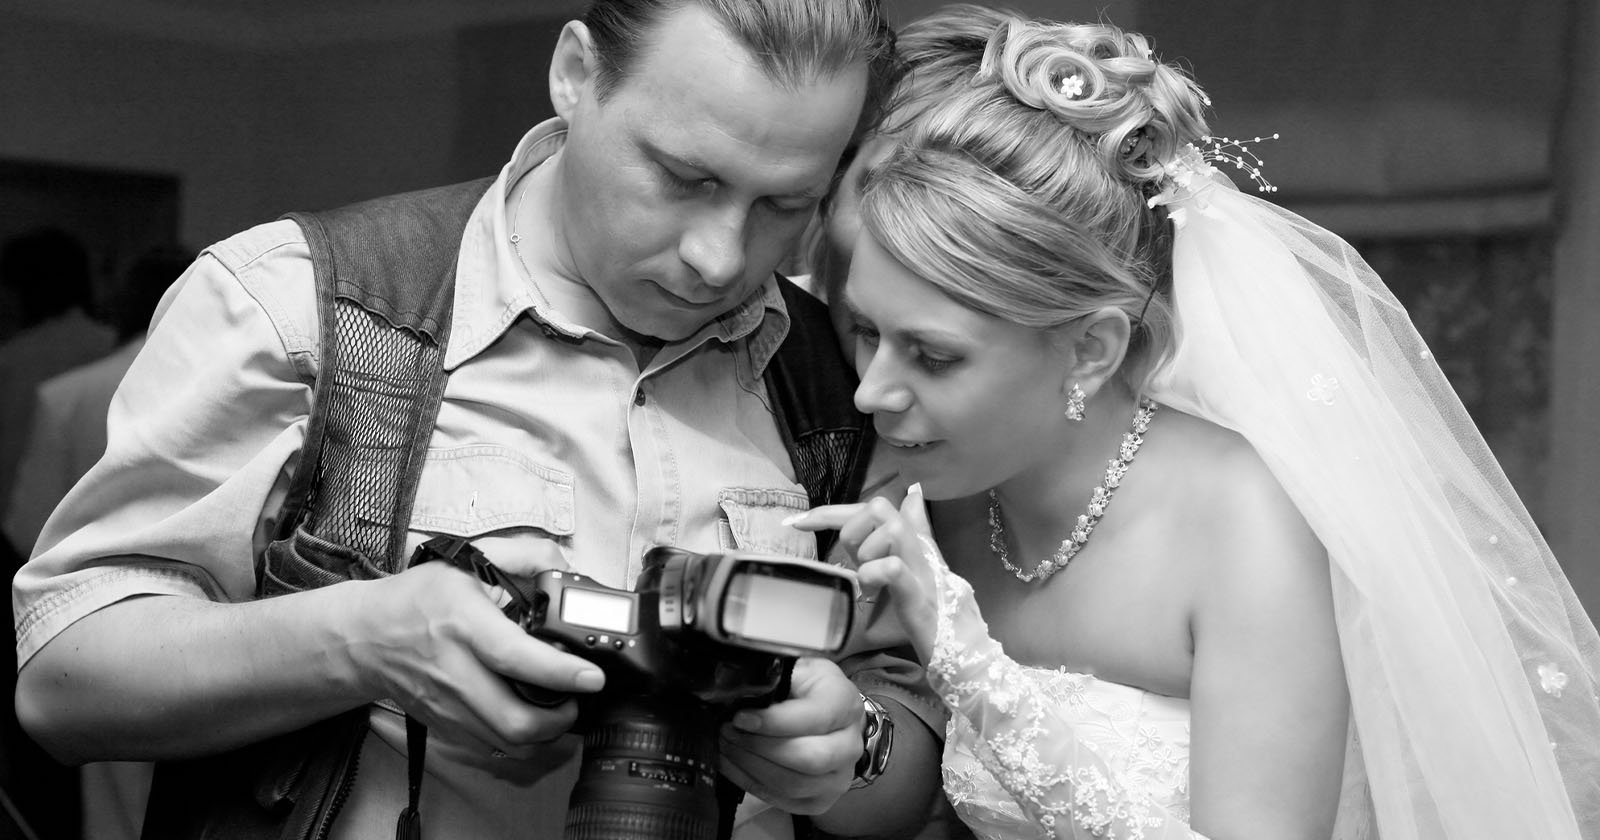 Bride Wants a Refund After Photographer Slept With the Groom